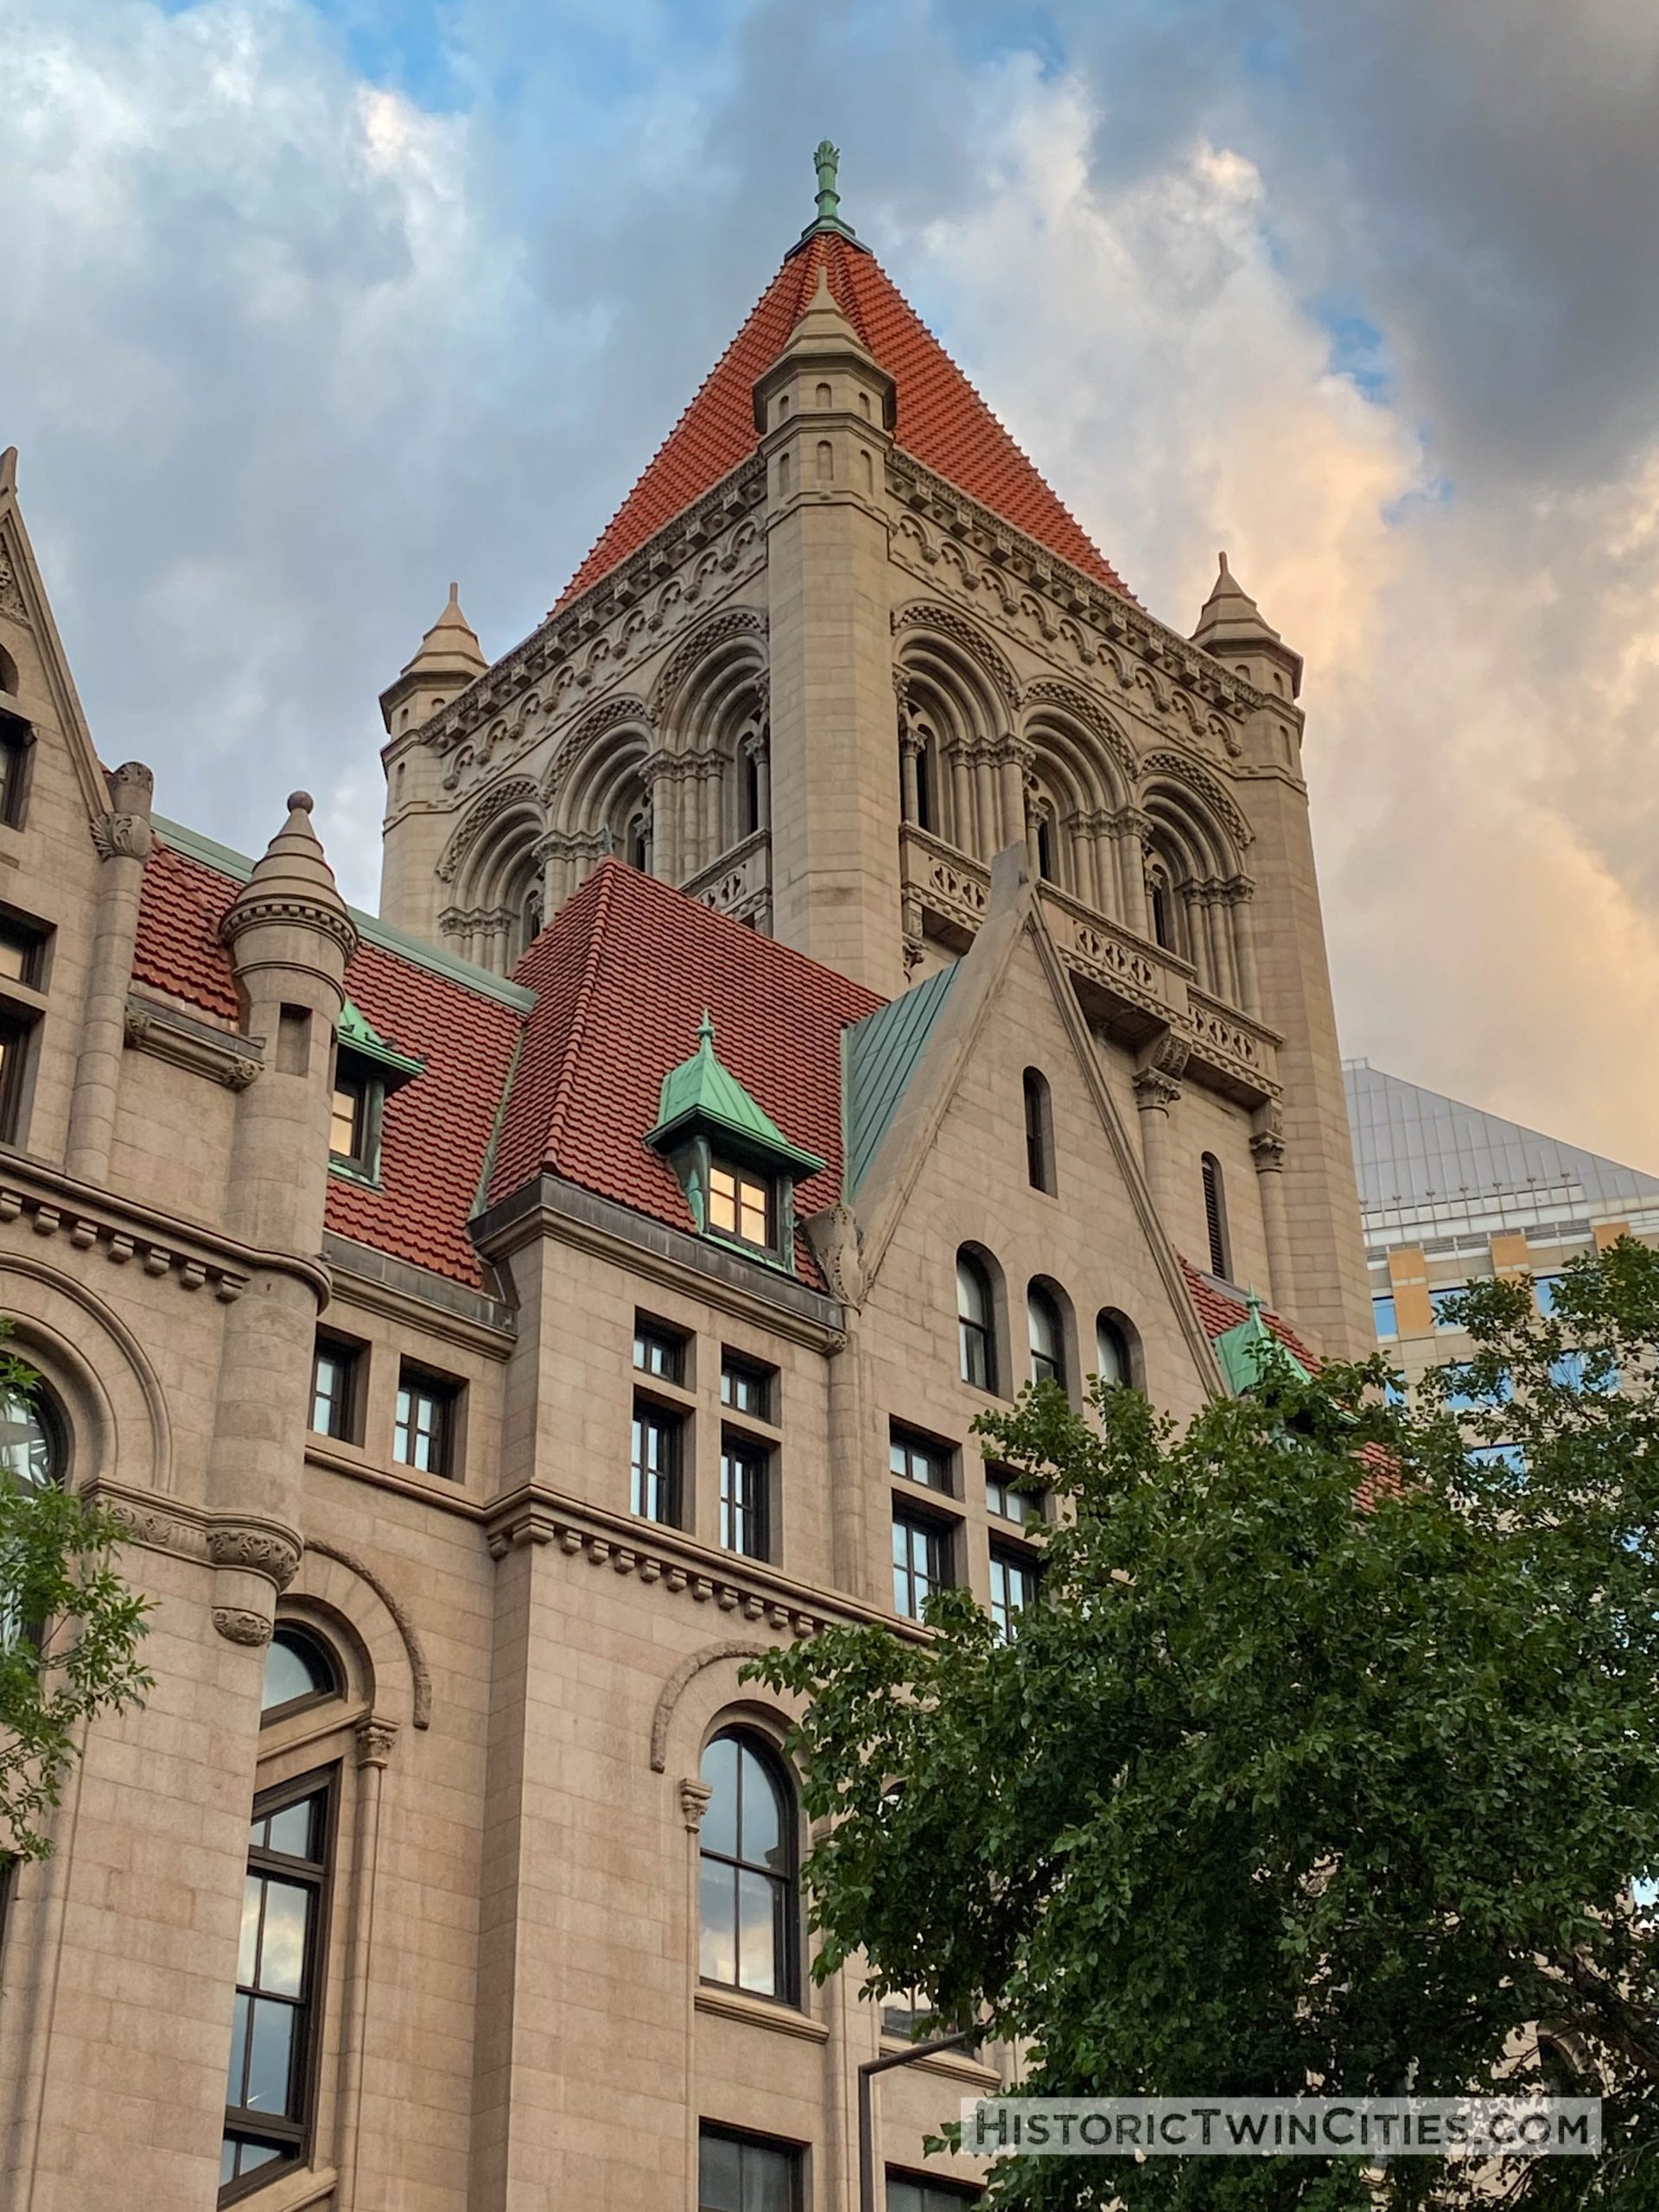 North tower of the Landmark Center in St. Paul, MN